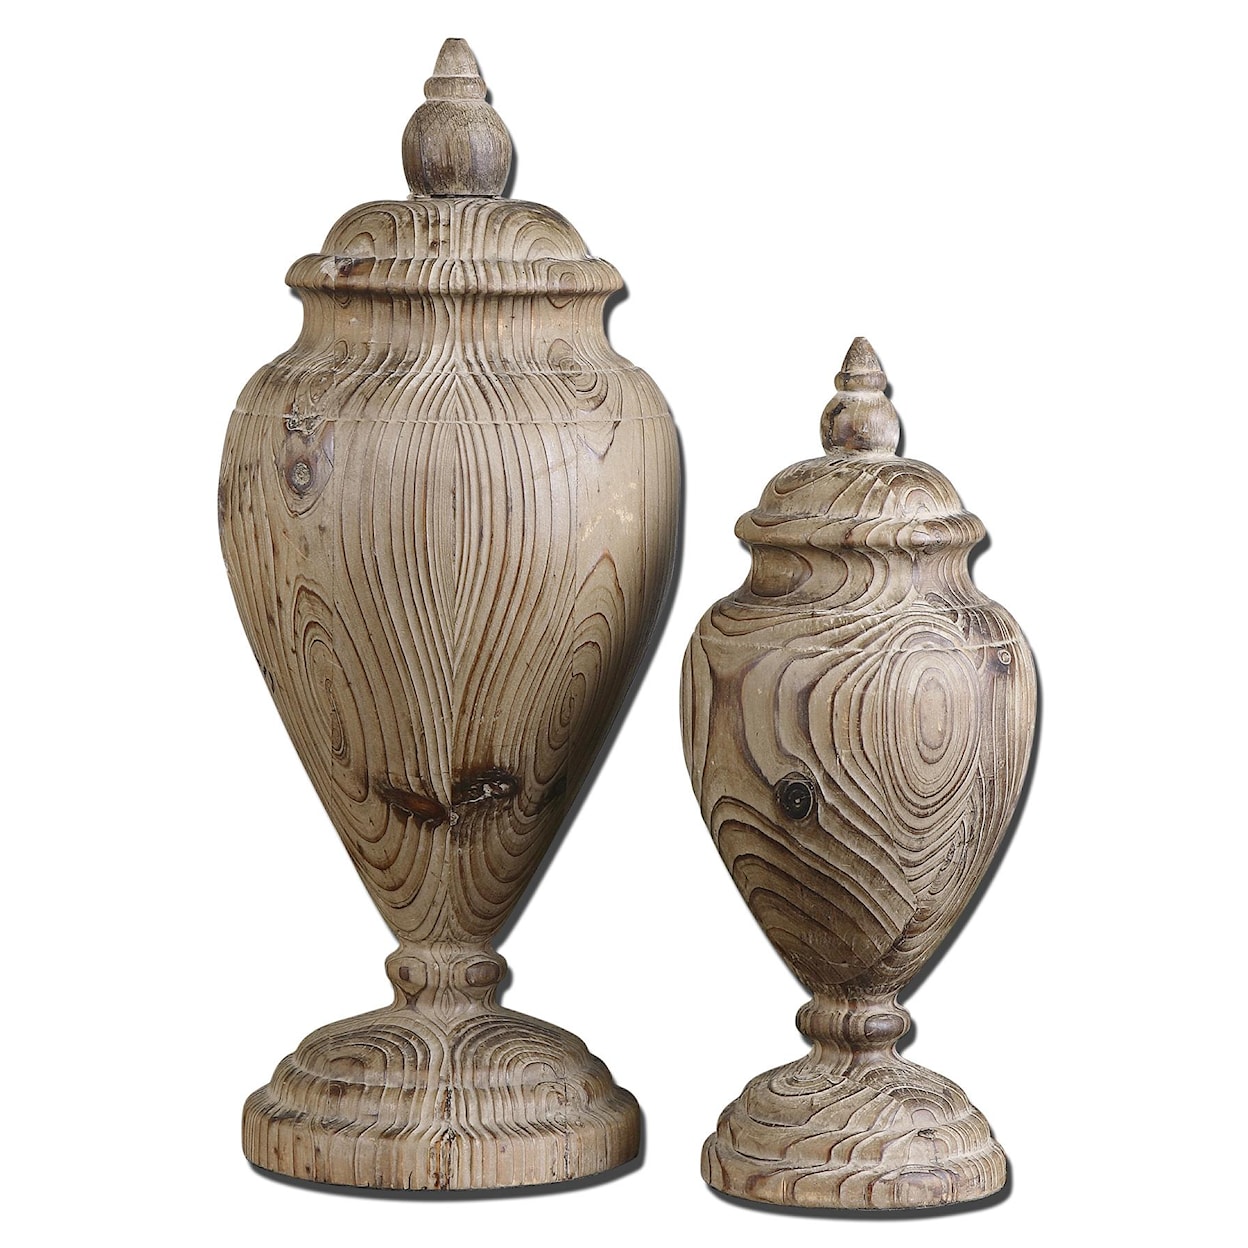 Uttermost Accessories - Statues and Figurines Brisco Finials Set of 2